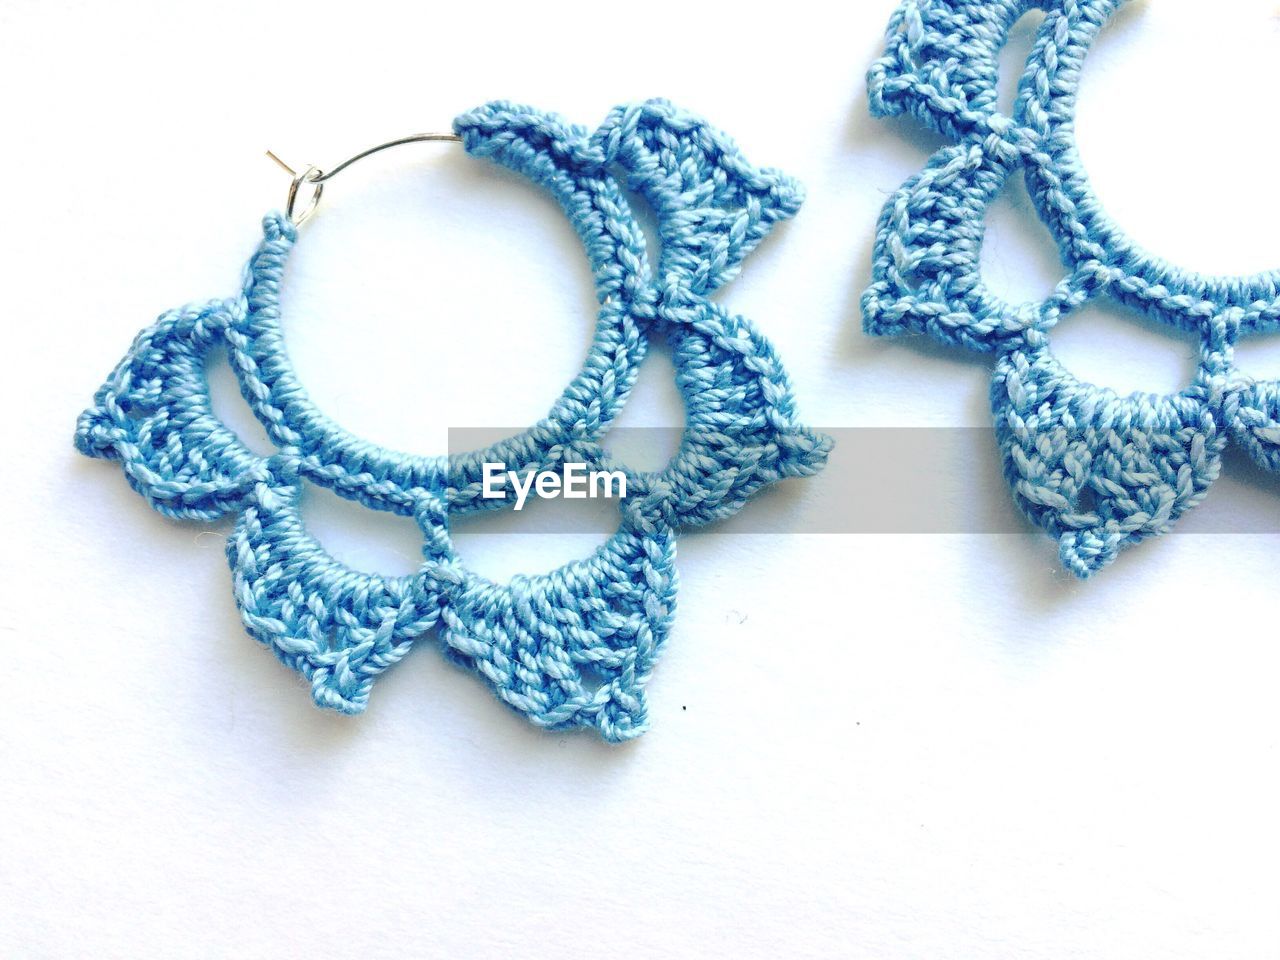 Close-up of crochet earrings on white background